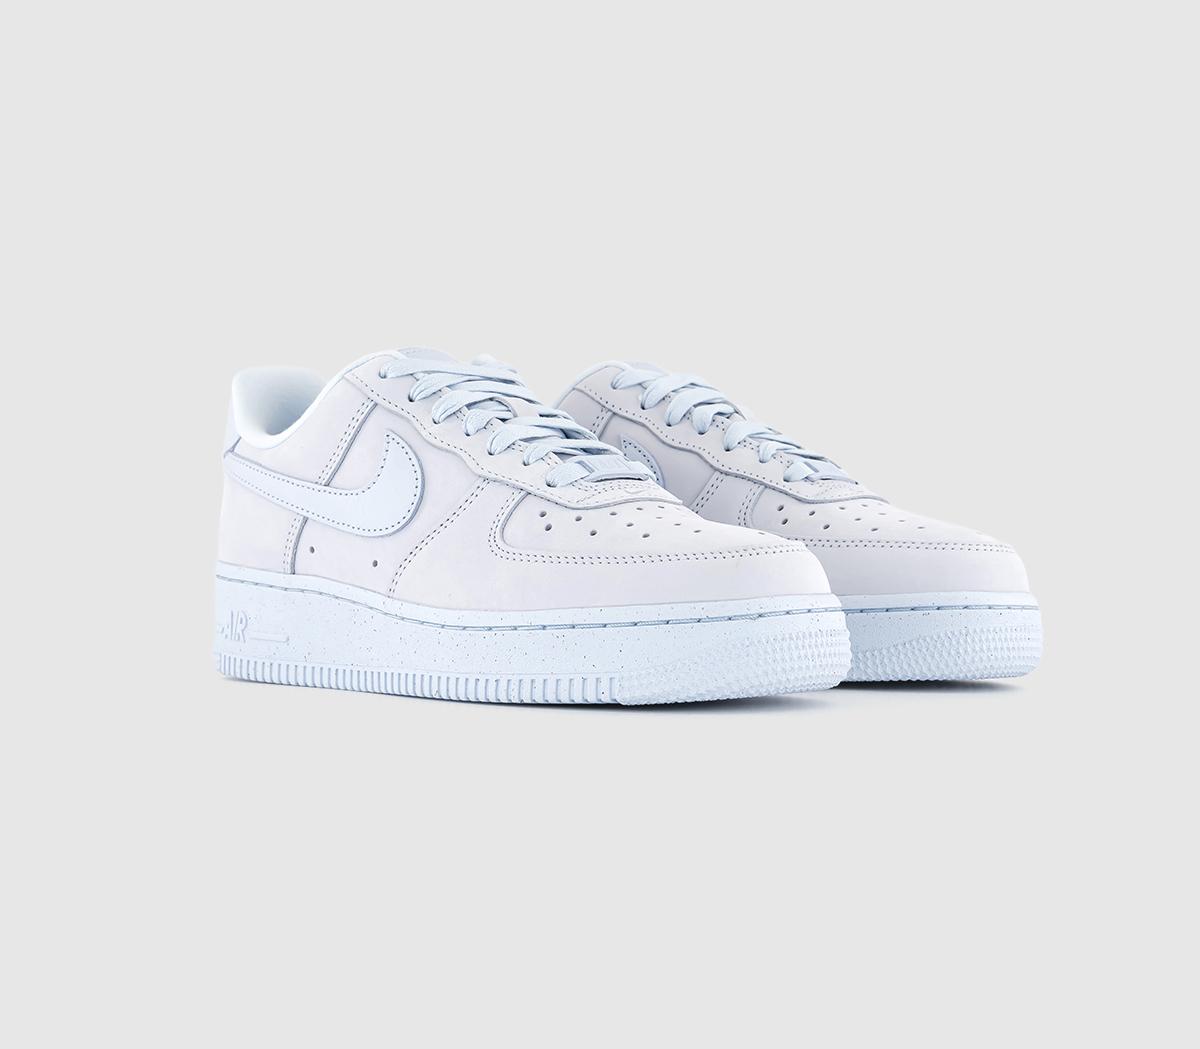 Nike Air Force 1 ’07 Prm Trainers Blue Tint, 5